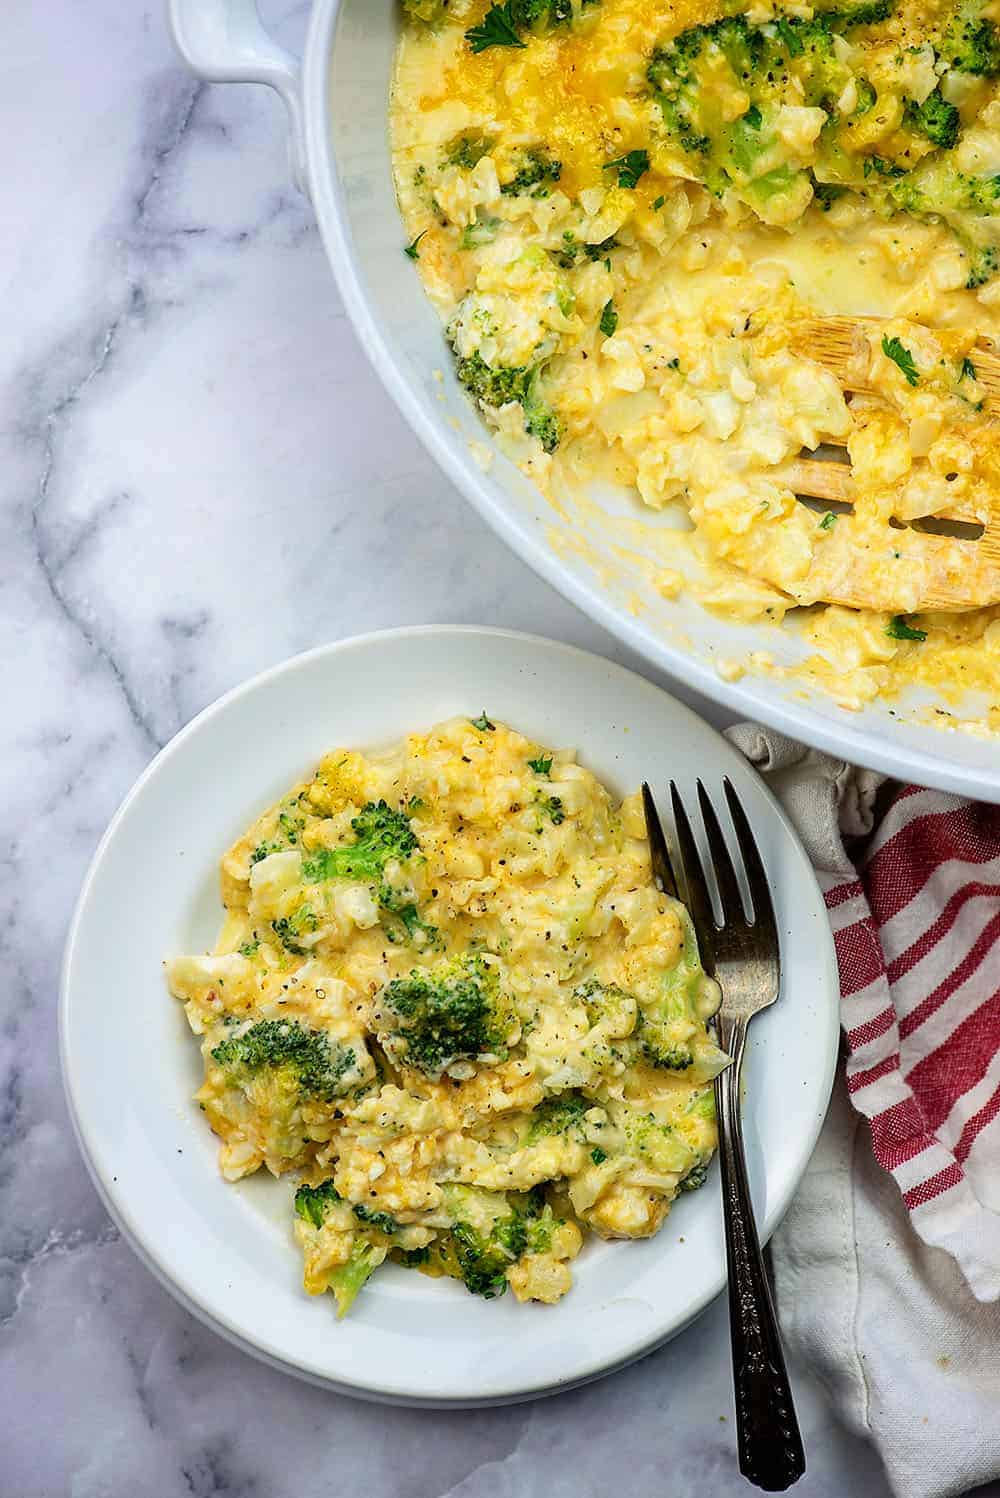 Healthy Broccoli Rice Casserole That Low Carb Life,Plywood Thickness